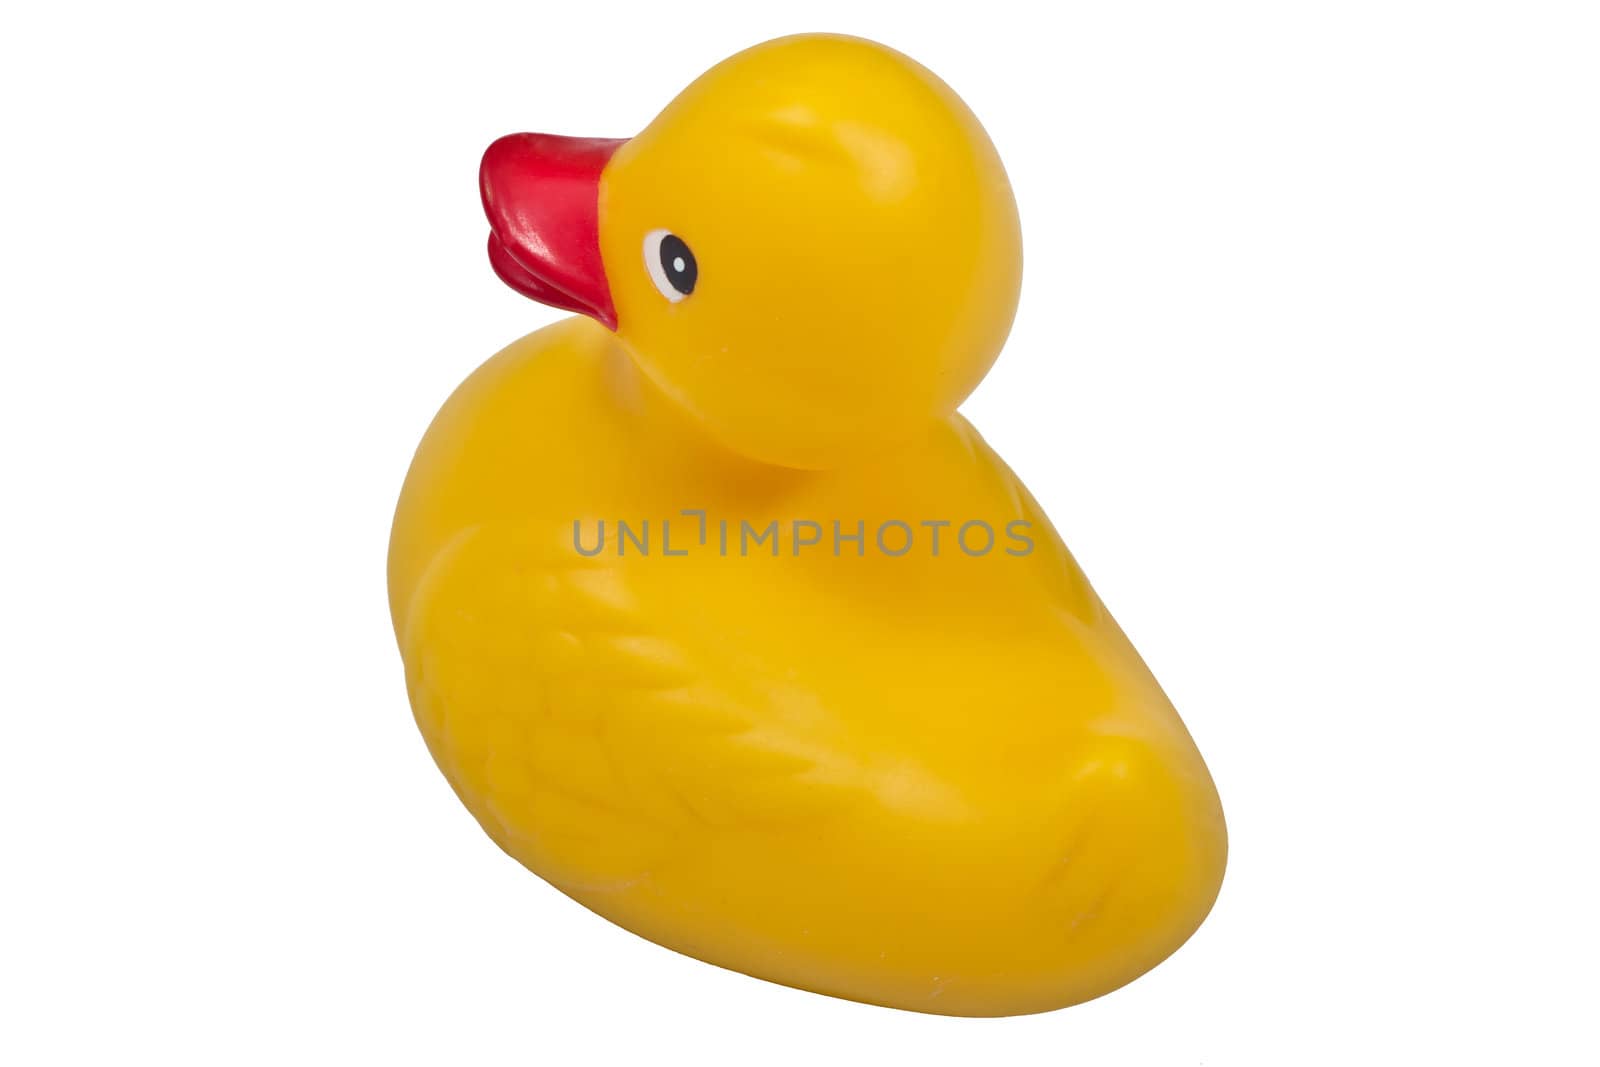 An yellow rubber duck isolated on a white background.